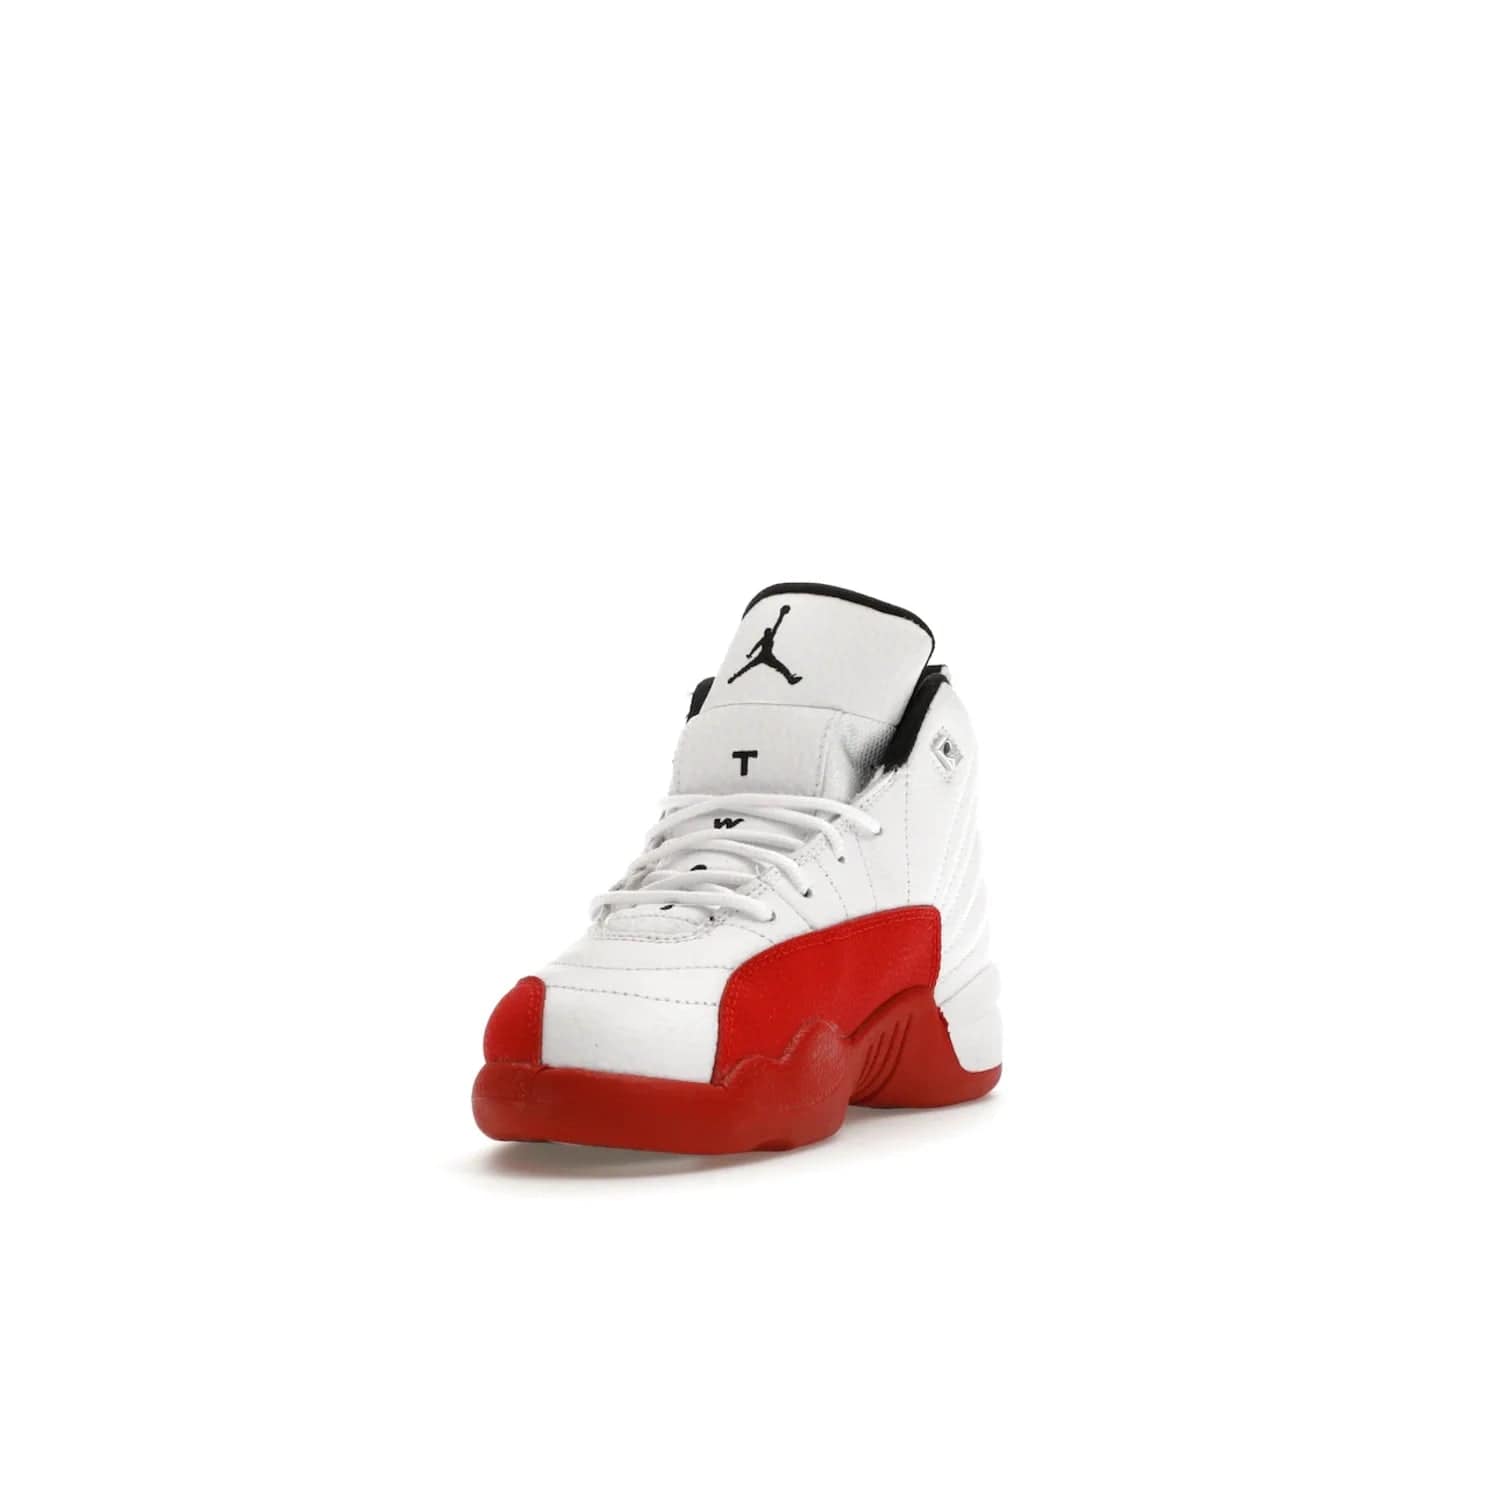 Jordan 12 Retro Cherry (2023) (PS) - Image 13 - Only at www.BallersClubKickz.com - Jordan 12 Retro Cherry dropping for toddlers in 2023! White leather upper with black overlays and red branding. Classic court style for your little one.